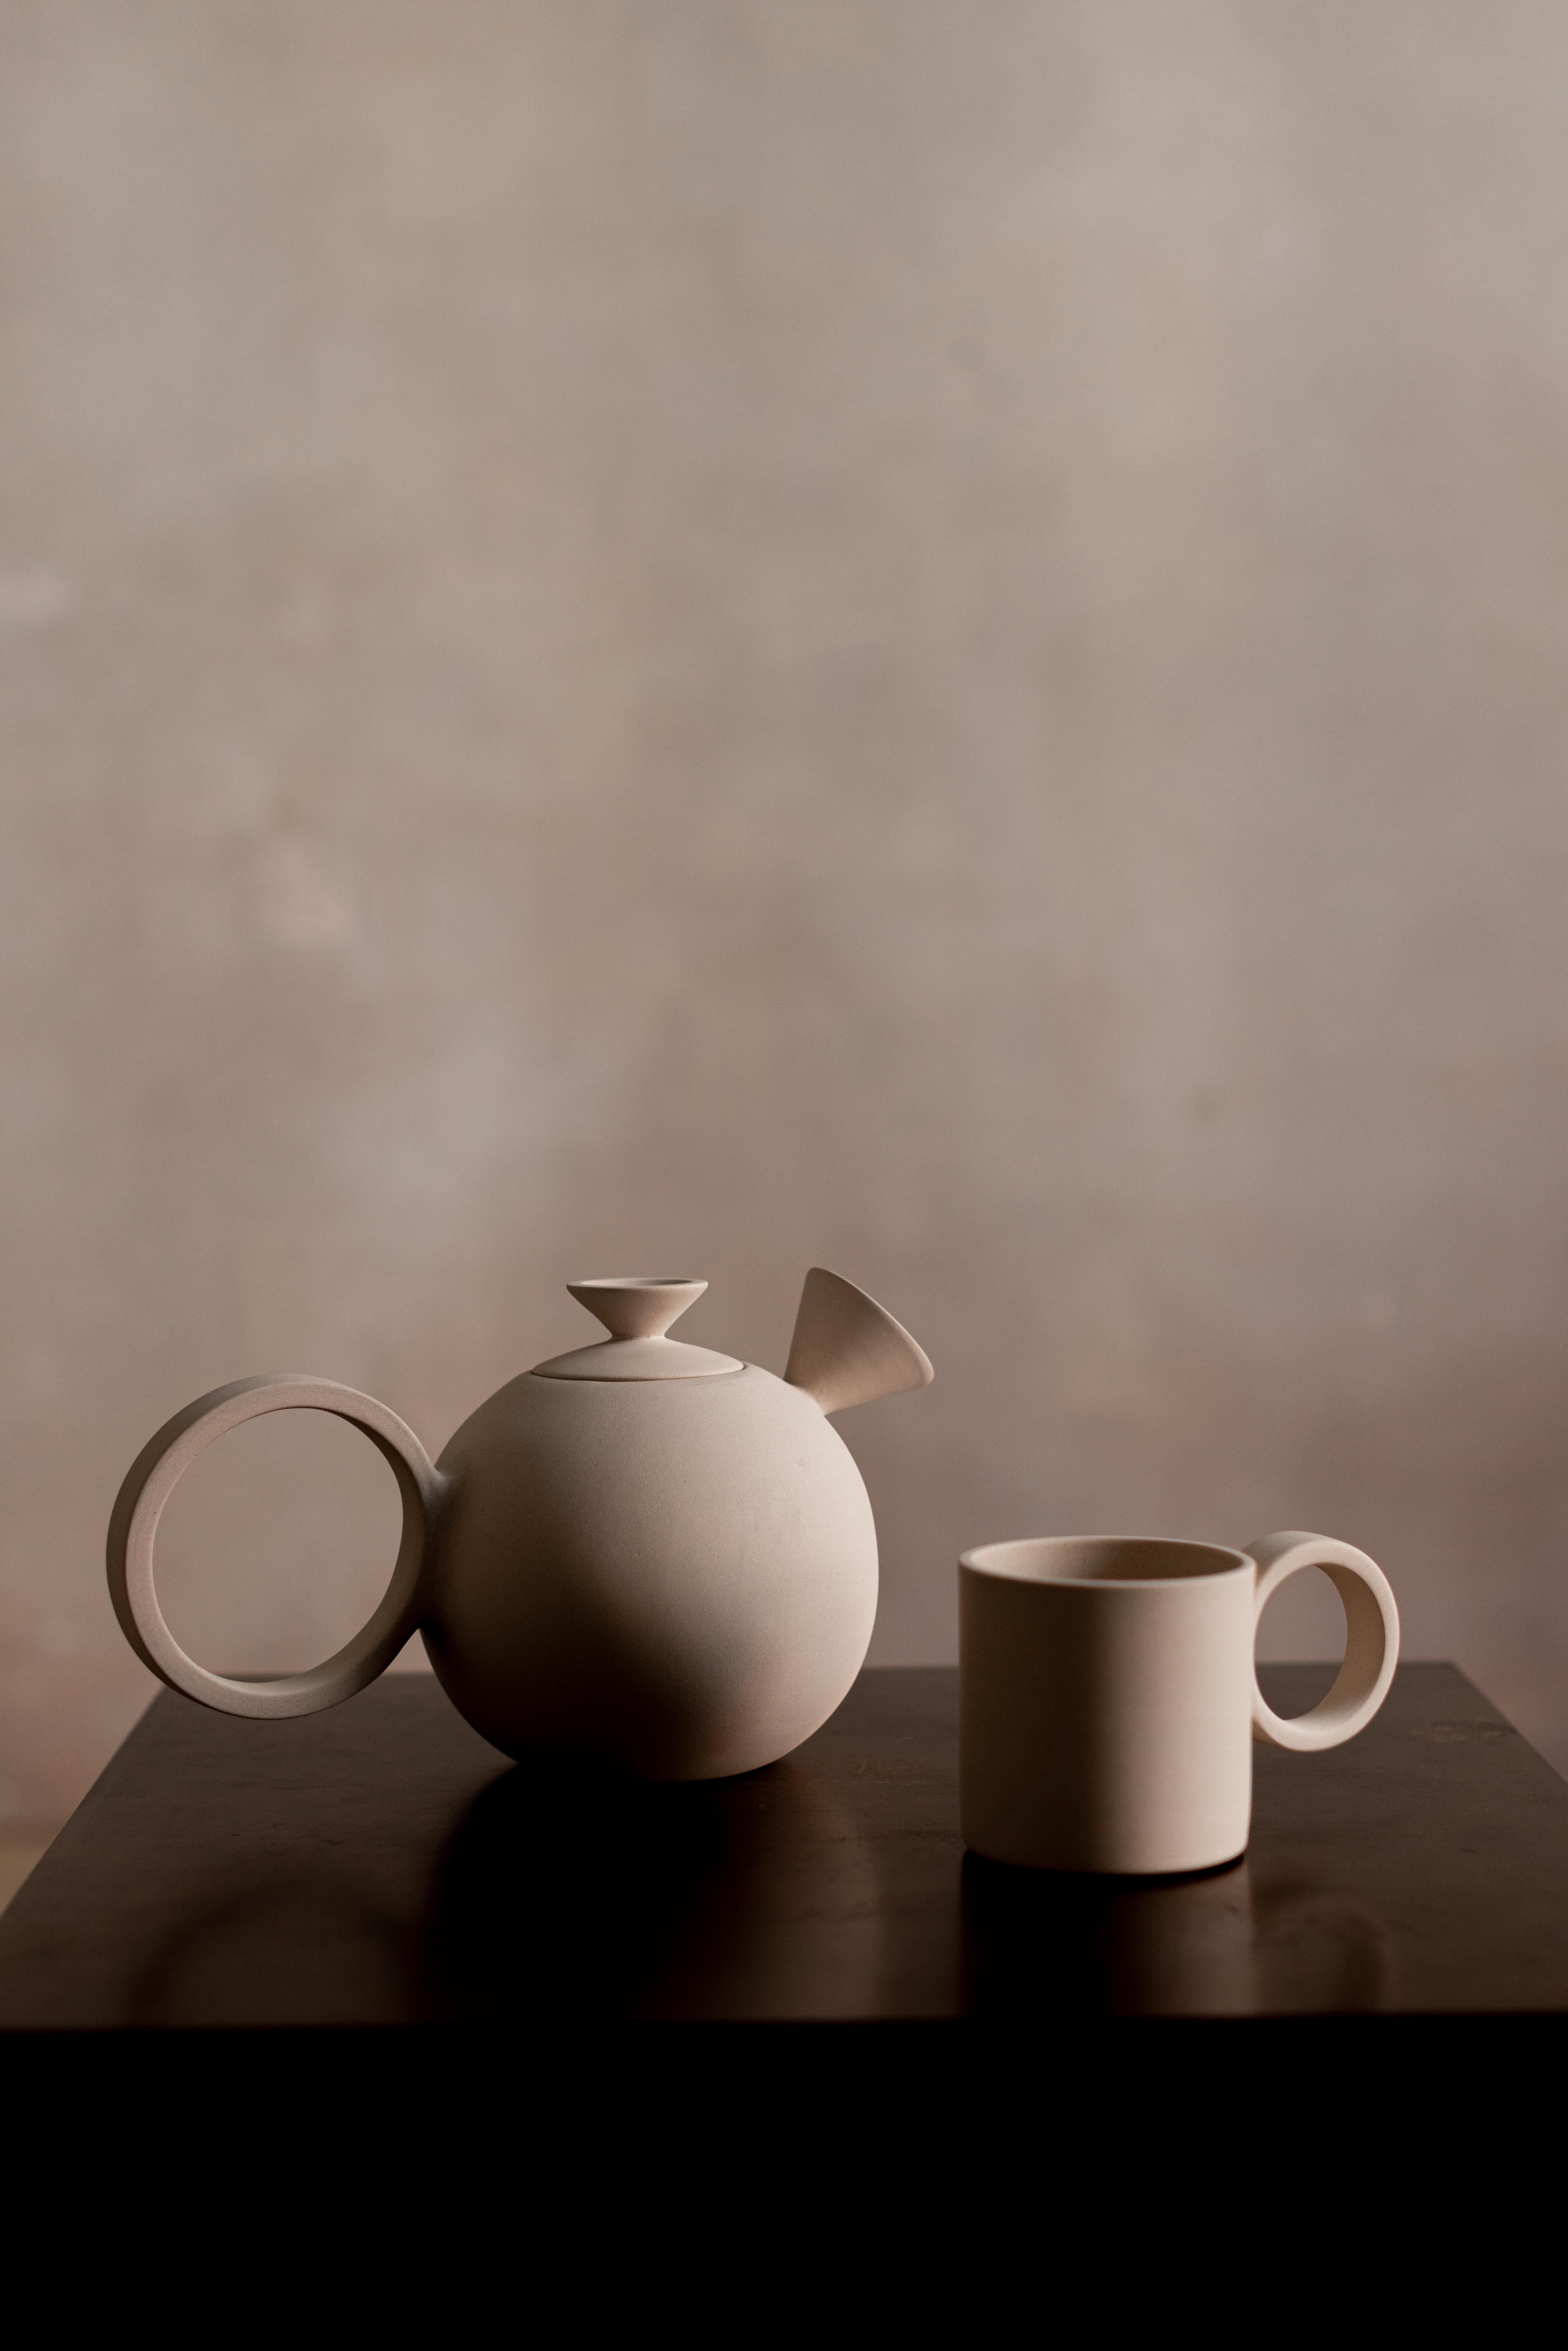 Set of 2 Euclid Teapot and Mug by Eter Design
Unique Piece.
Dimensions: Teapot: D 16 x W 28 x H 16 cm.
Mug: Ø 9 cm x H 9 cm.
Materials: Clay.
Sustainable - Eco-friendly. Handmade. Each piece may vary slightly in color, Size, texture and shape.